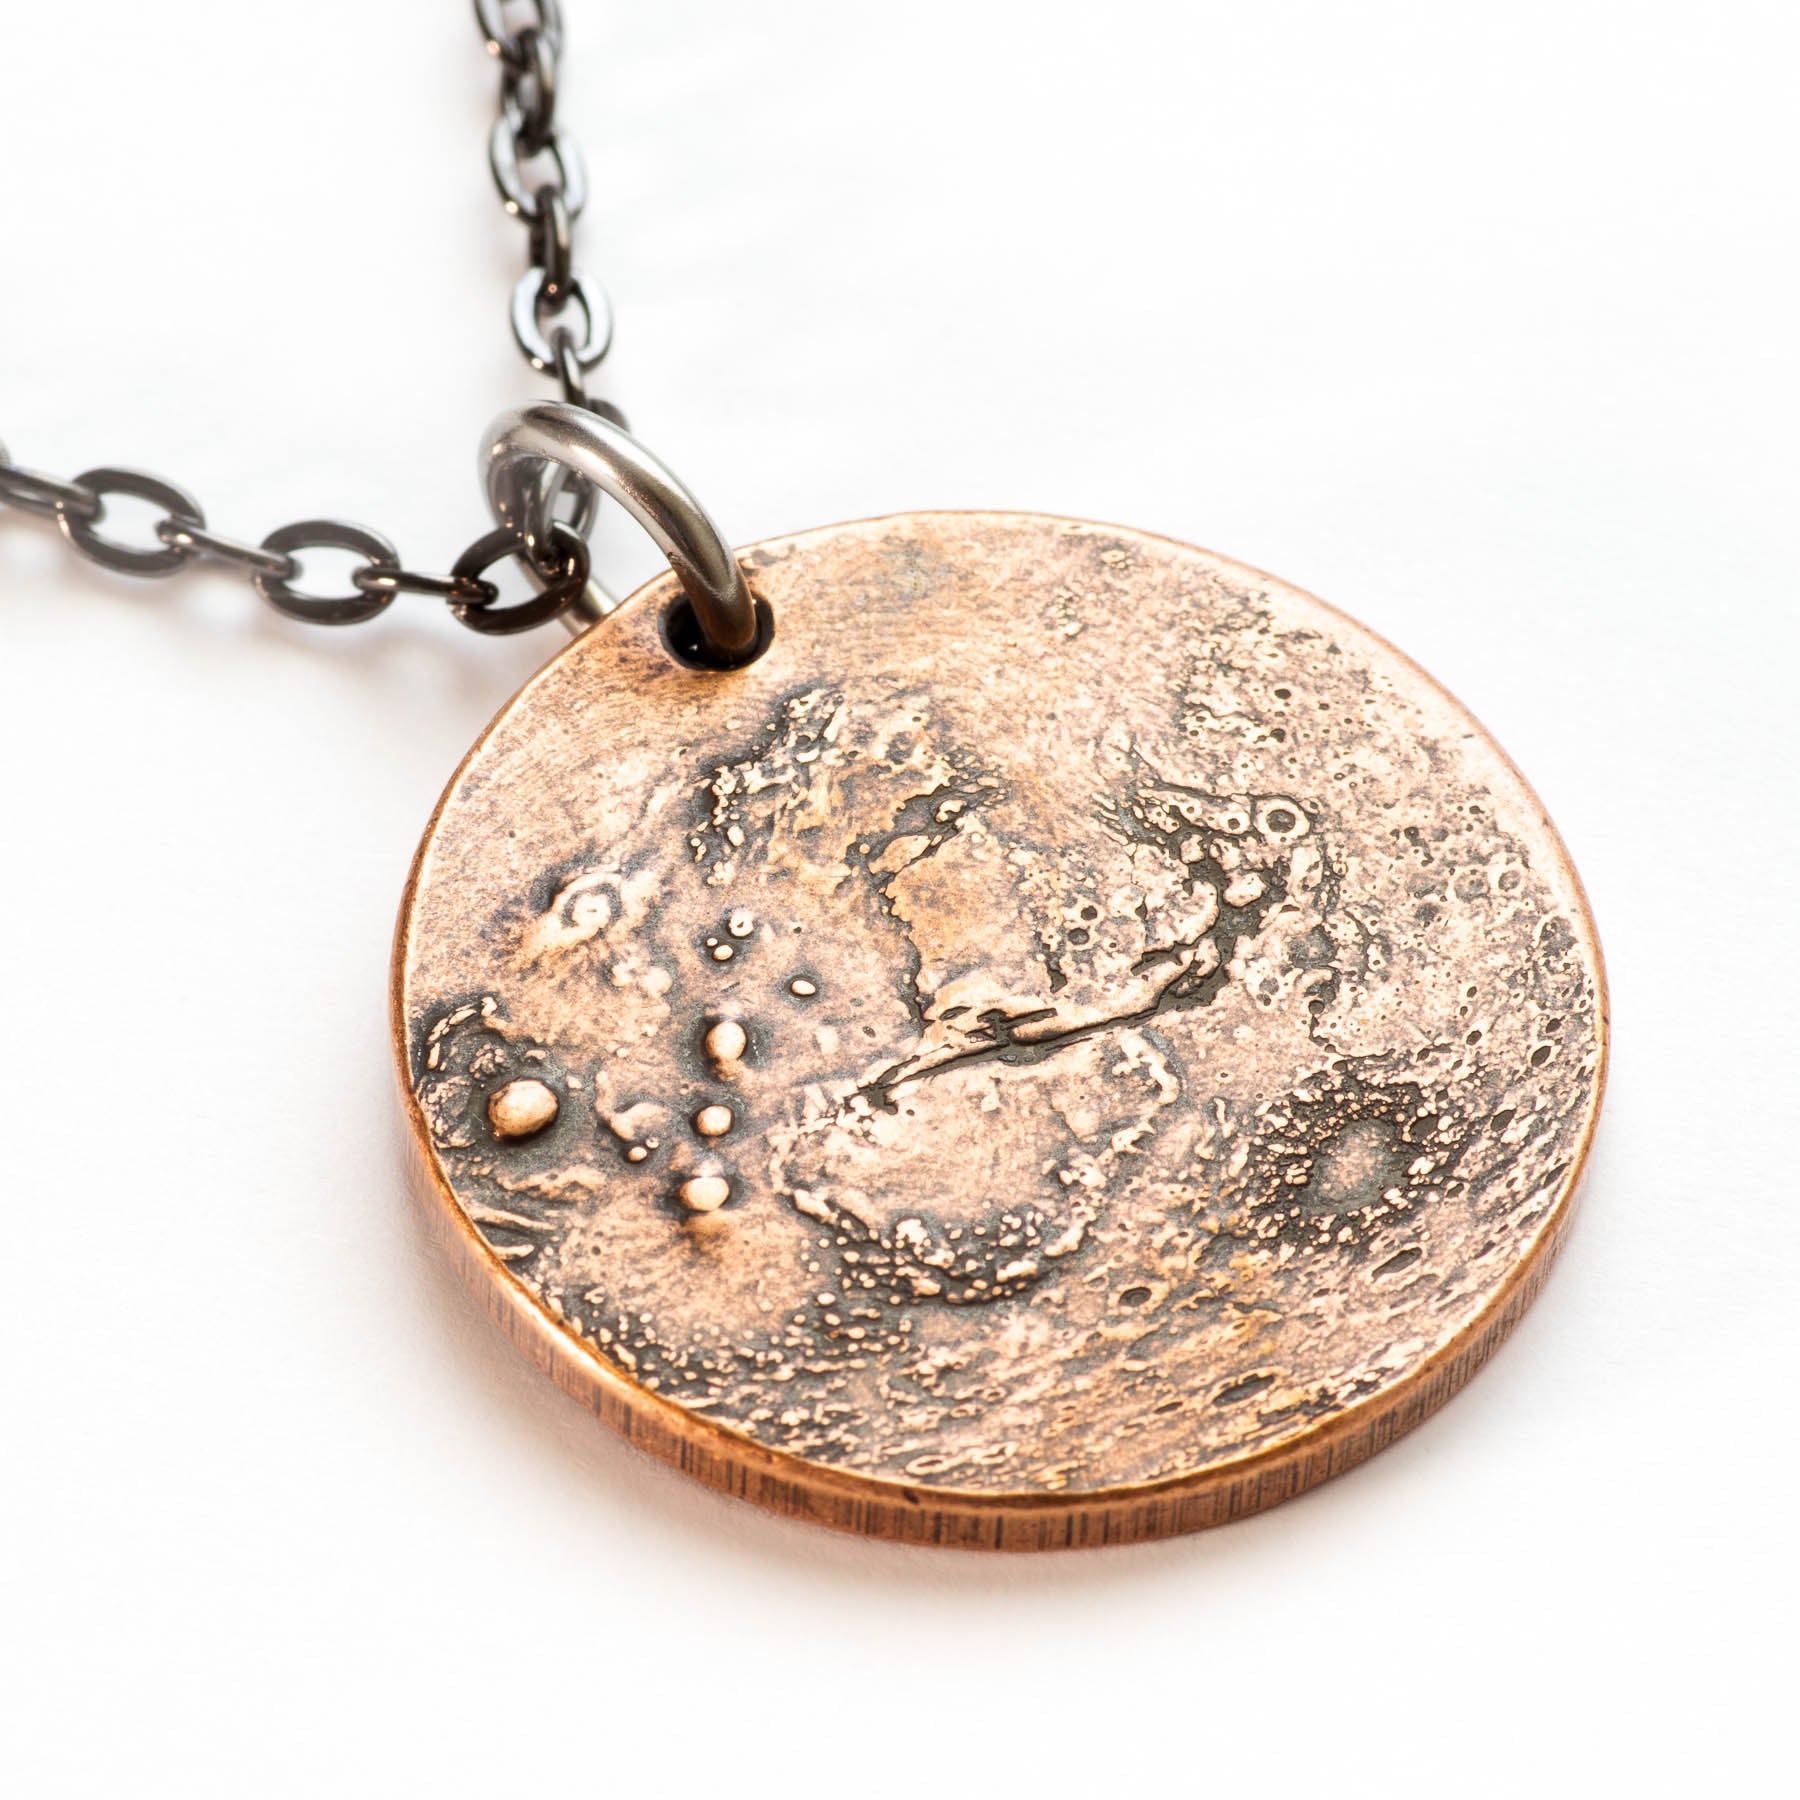 Mars red planet martian olympus mons valles marineris necklace | Shire Post Mint